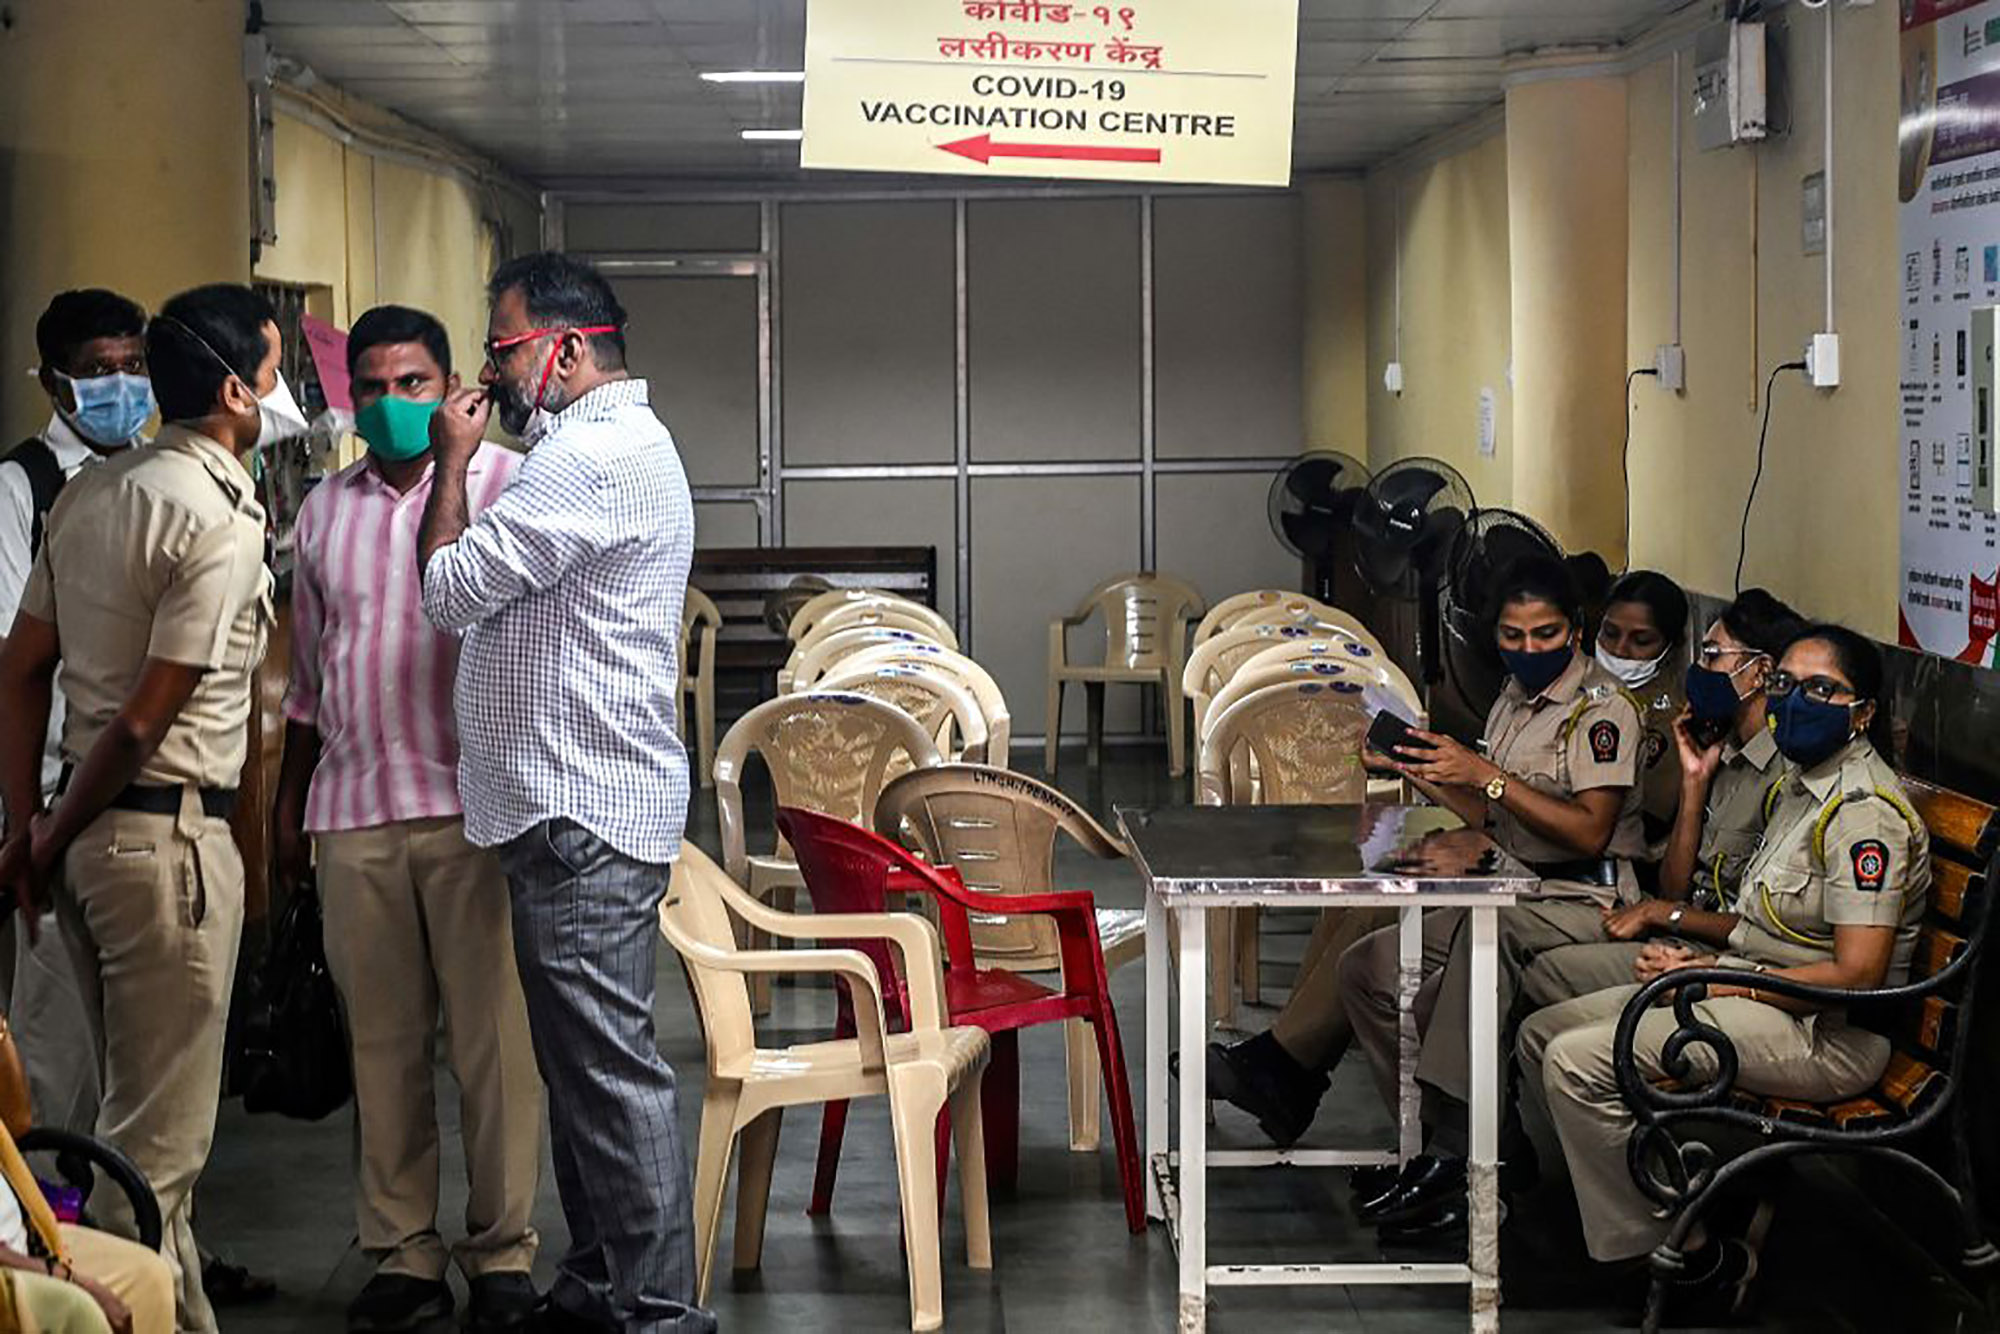 Hospital staff at a coronavirus vaccination centre after stopping due to vaccine shortage,&nbsp;in Mumbai on April 8.&nbsp;